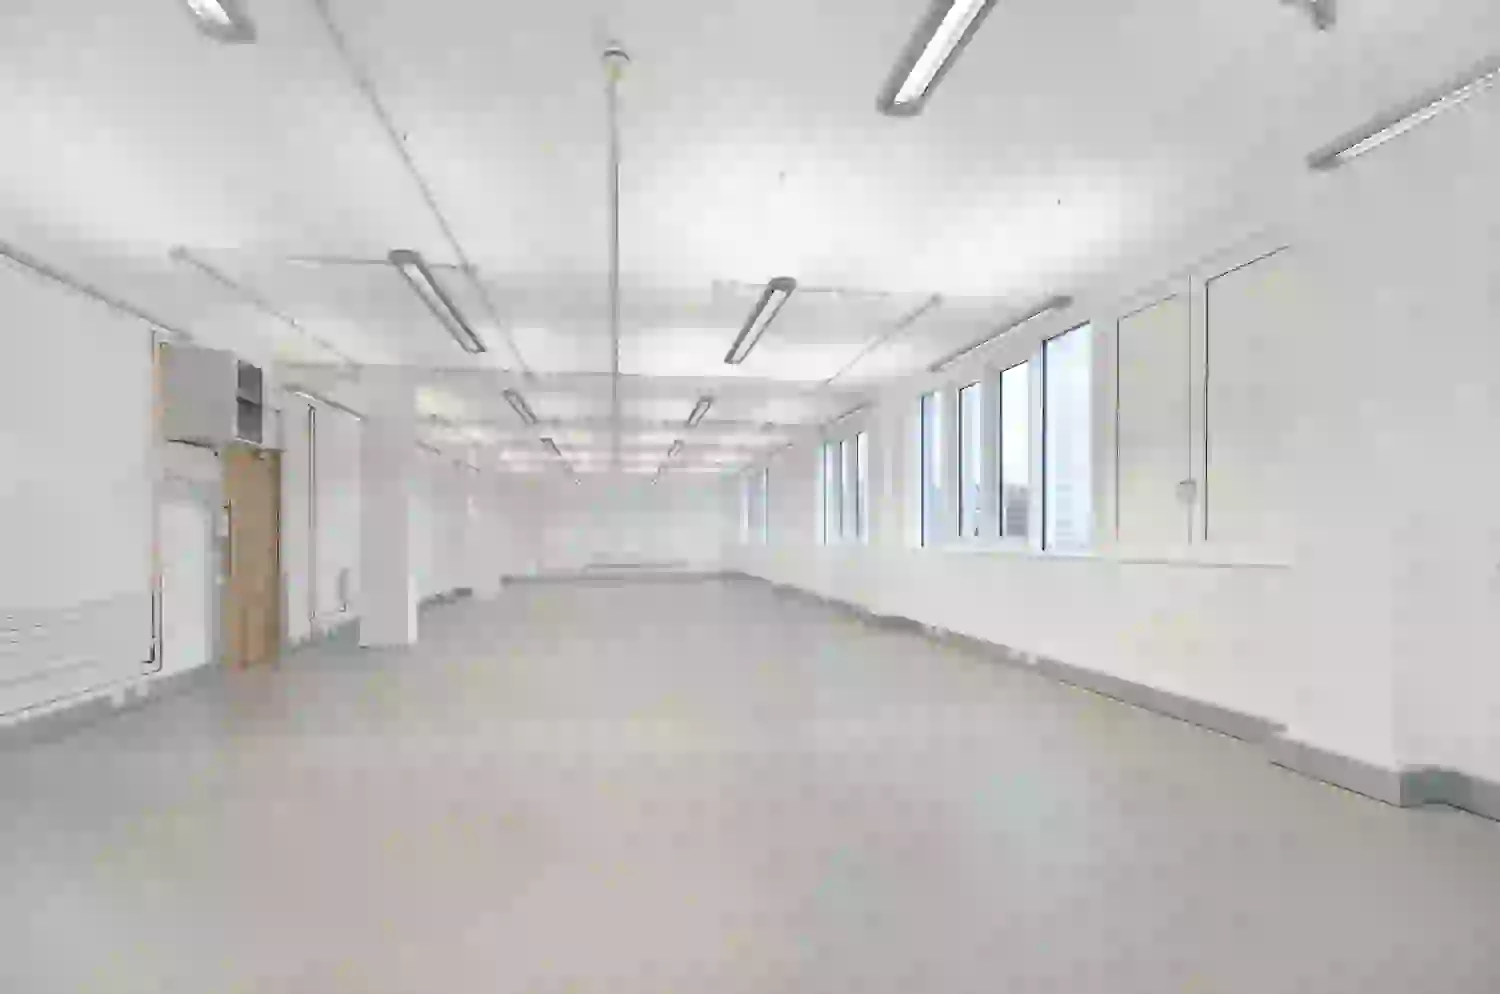 Office space to rent at The Light Bulb, 1 Filament Walk, Wandsworth, London, unit LU.317, 1653 sq ft (153 sq m).